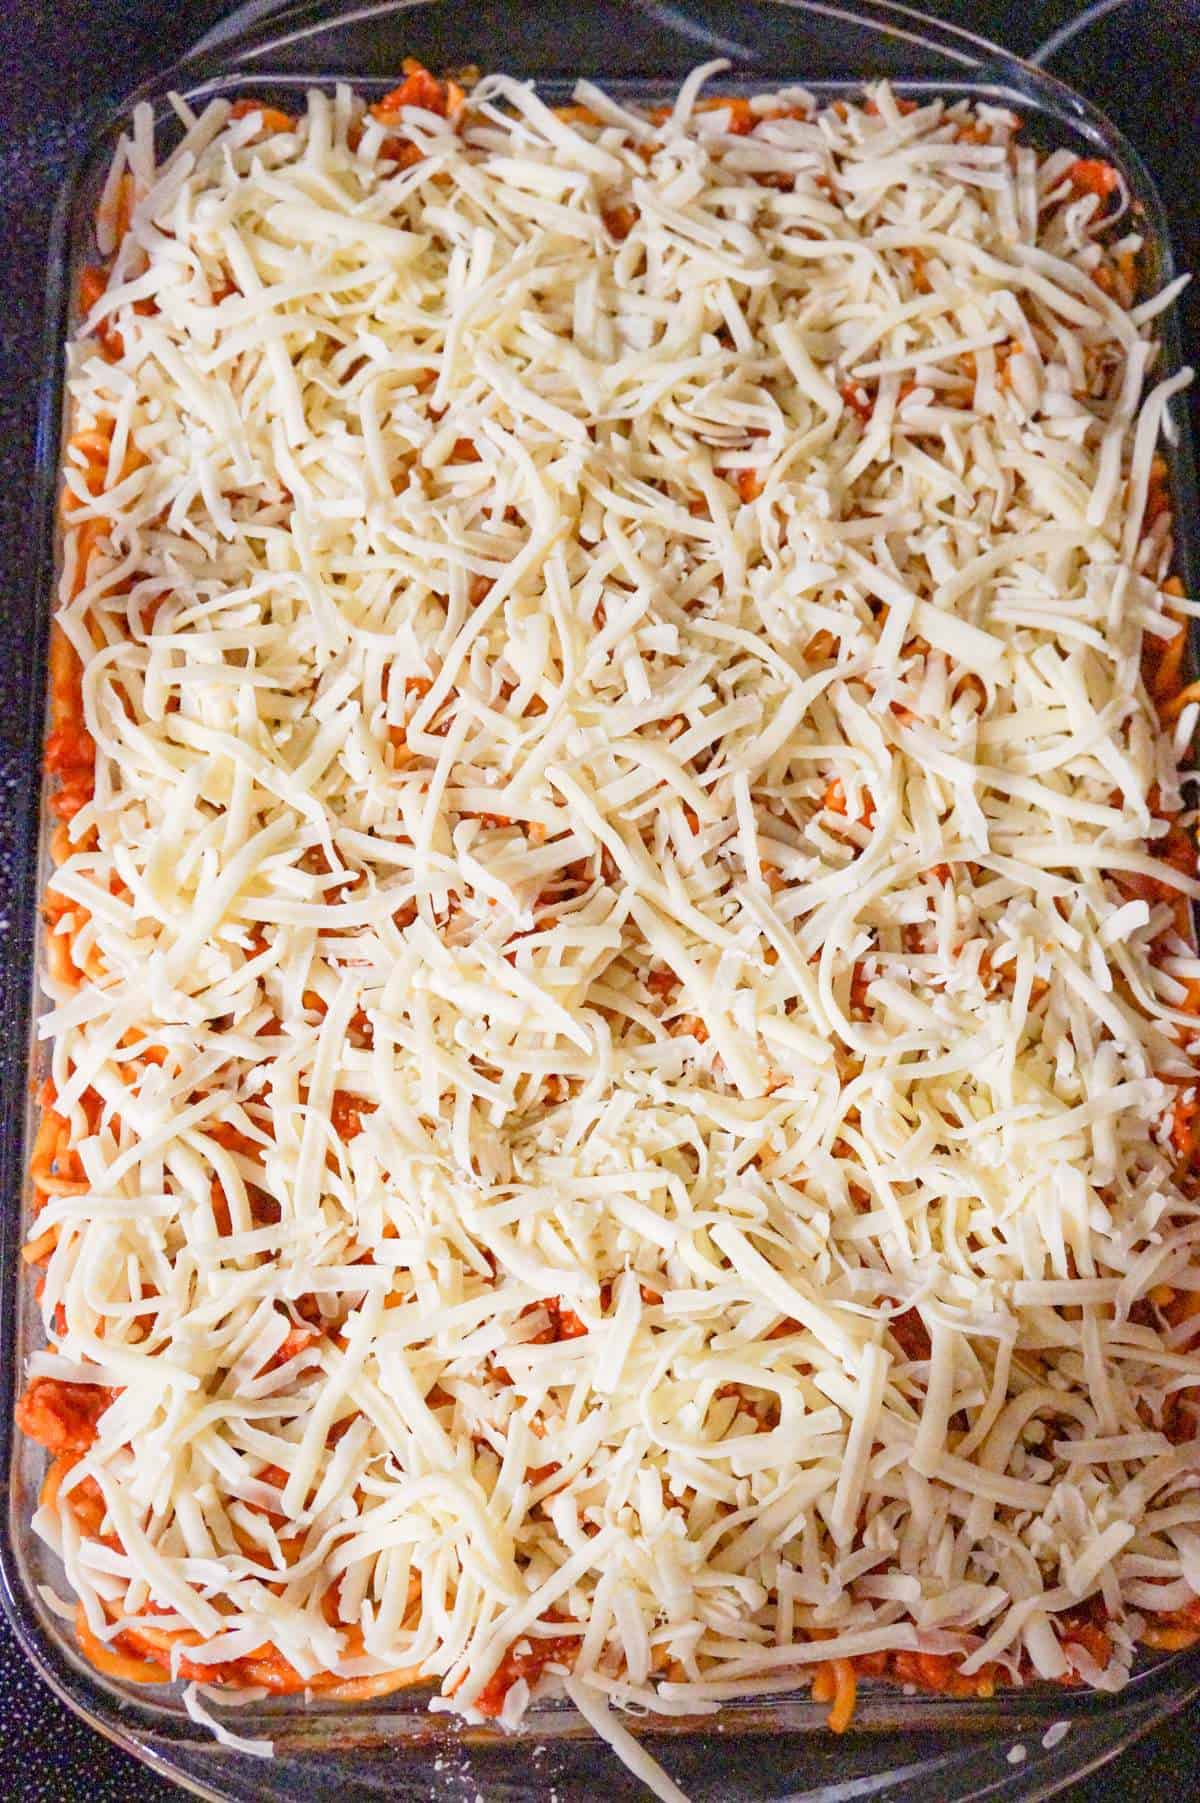 shredded cheese on top of spaghetti in a baking dish